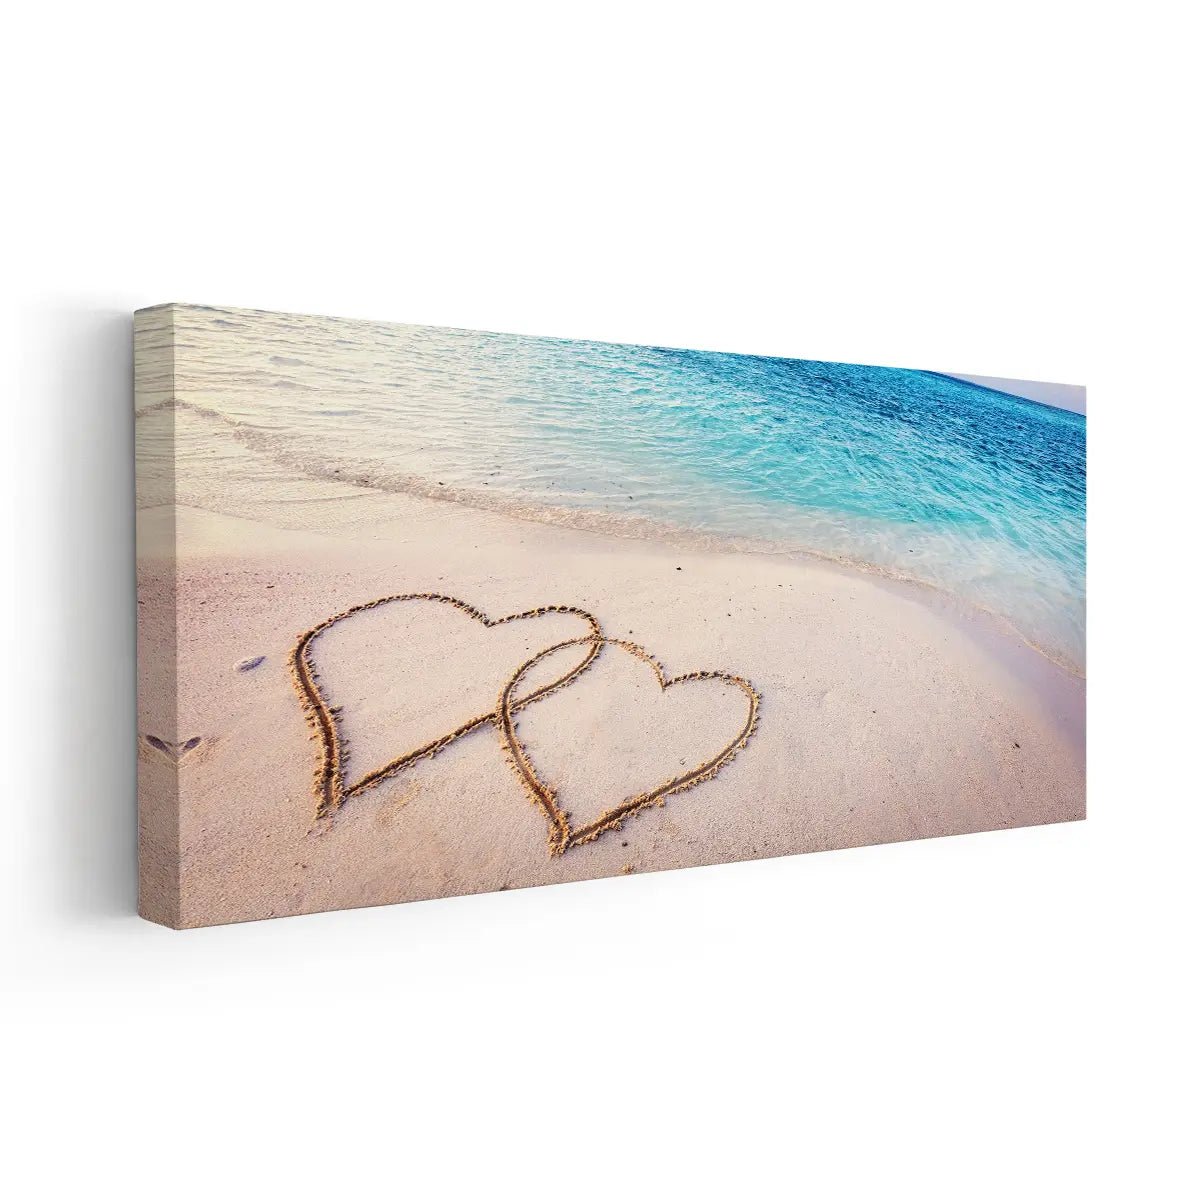 Two Hearts On The Sand Wall Art-Stunning Canvas Prints